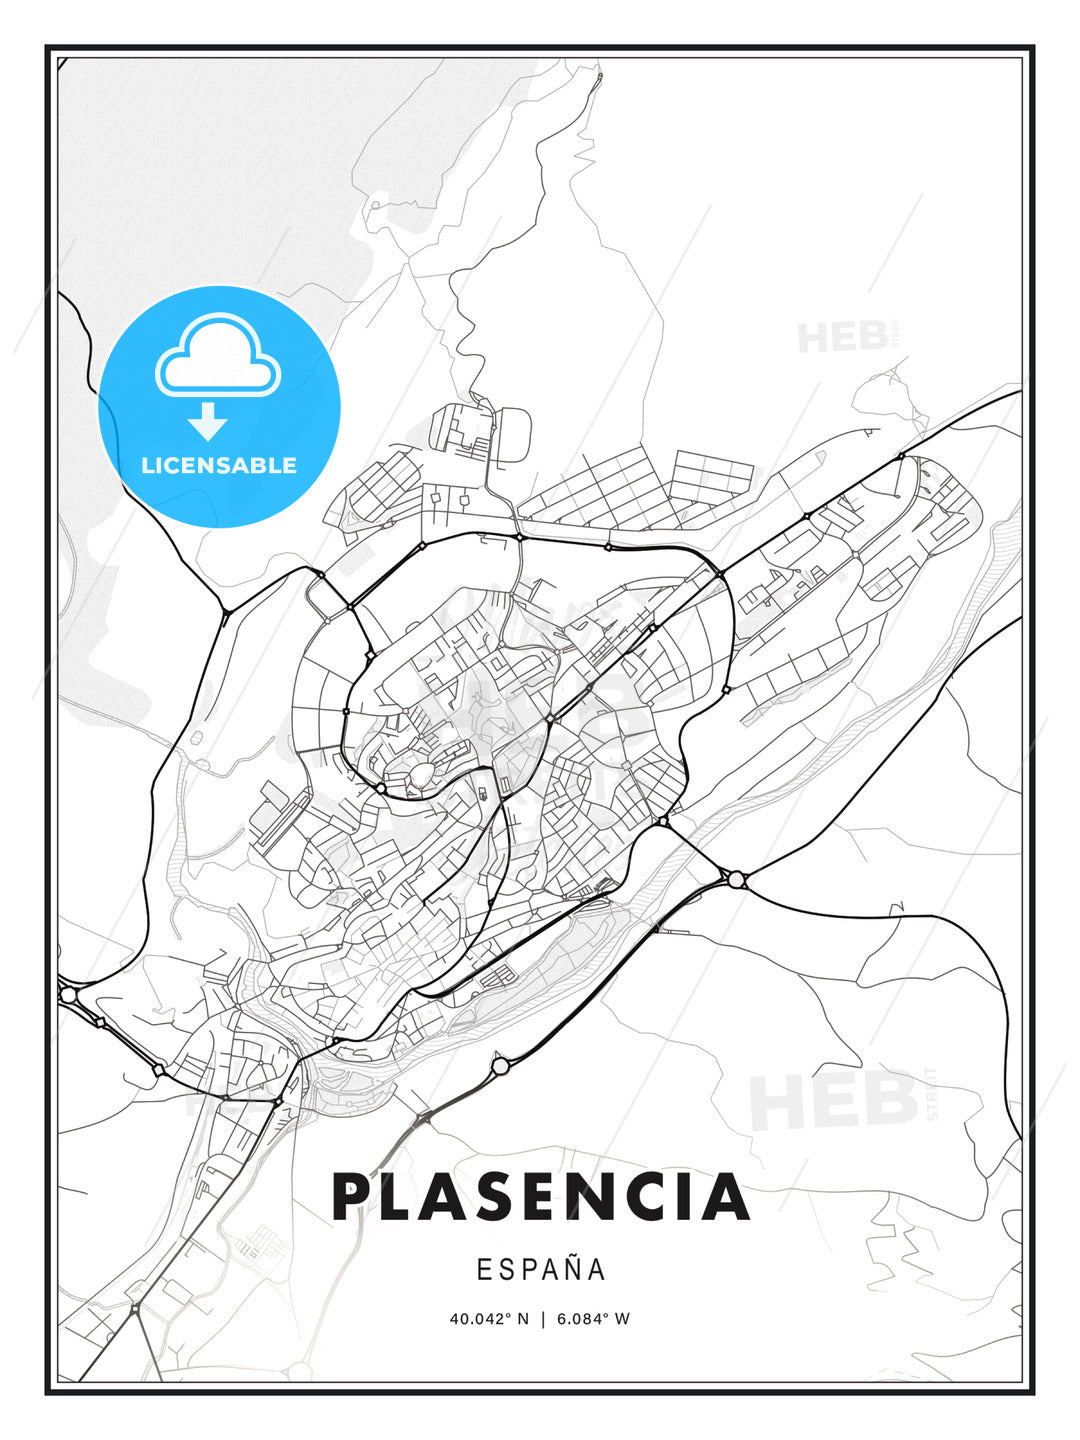 Plasencia, Spain, Modern Print Template in Various Formats - HEBSTREITS Sketches